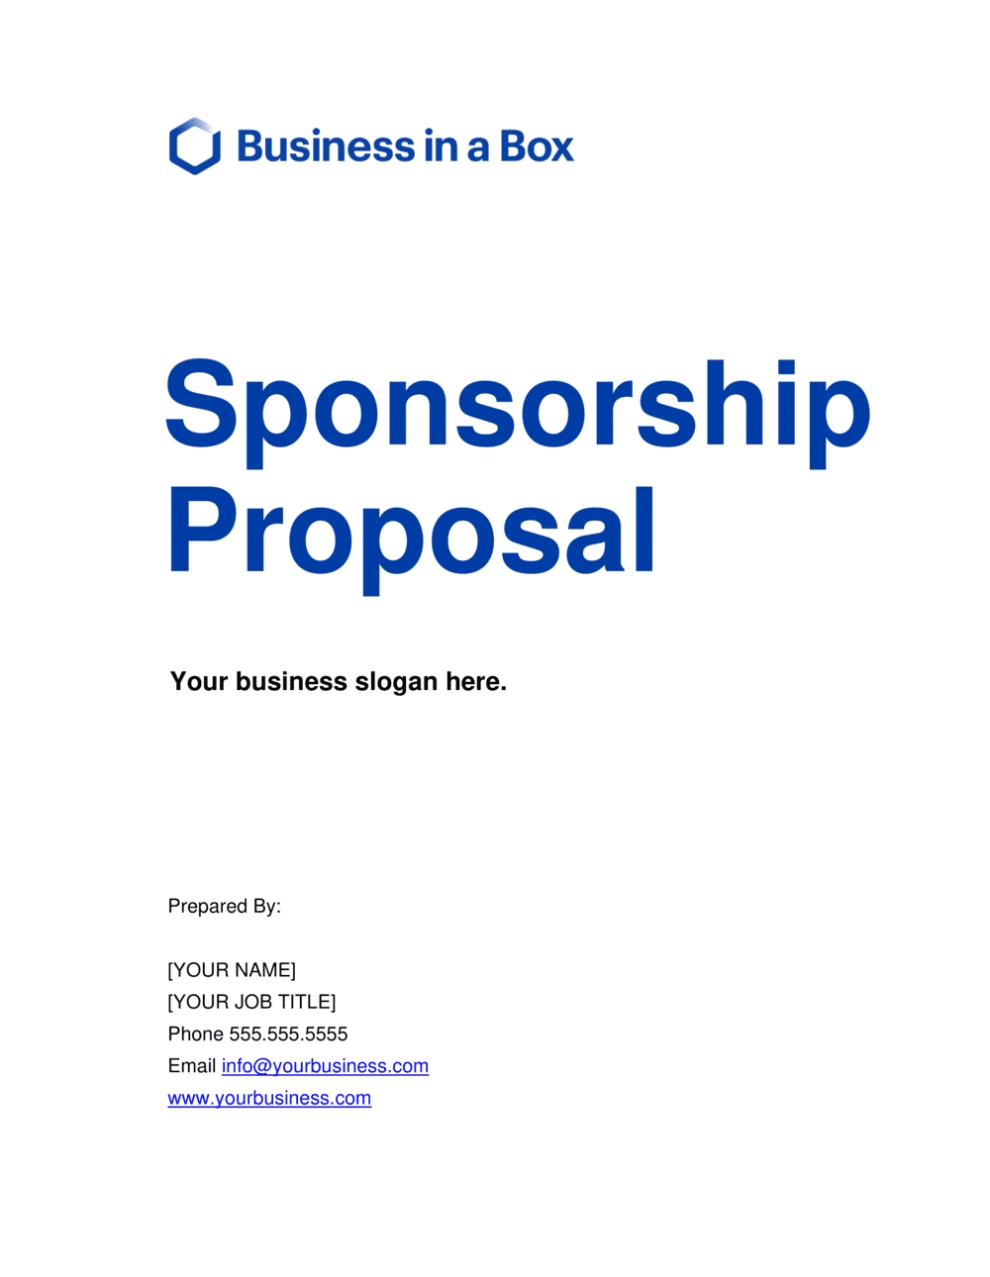 Sponsorship Proposal Template | By Business In A Box™ Regarding Corporate Sponsorship Proposal Template